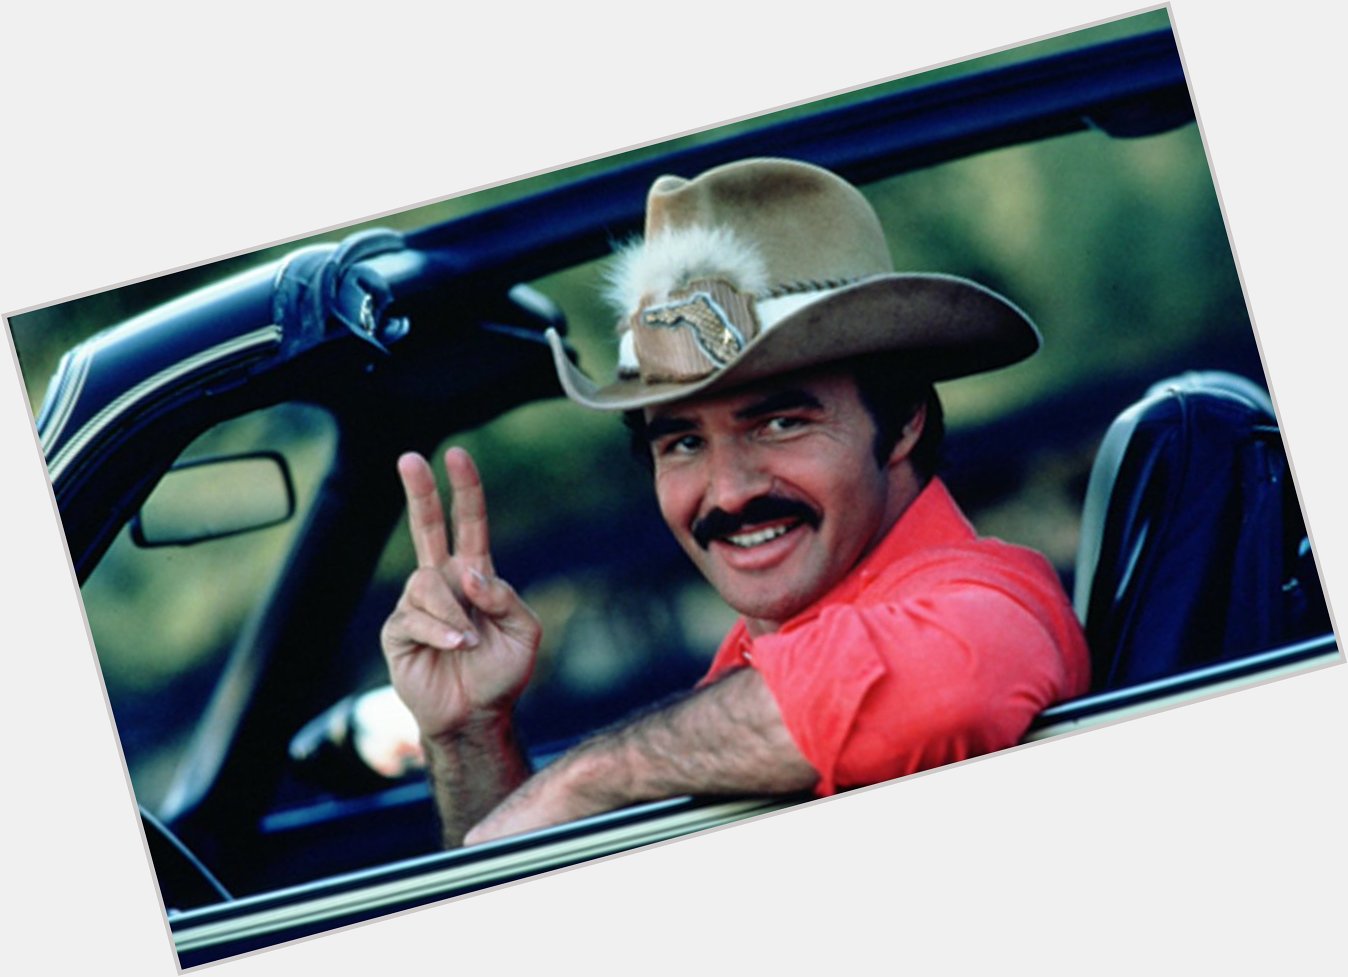 \"I take my hat off for one thing, one thing only.\" Happy 81st birthday to the ultimate bandit, Burt Reynolds. 